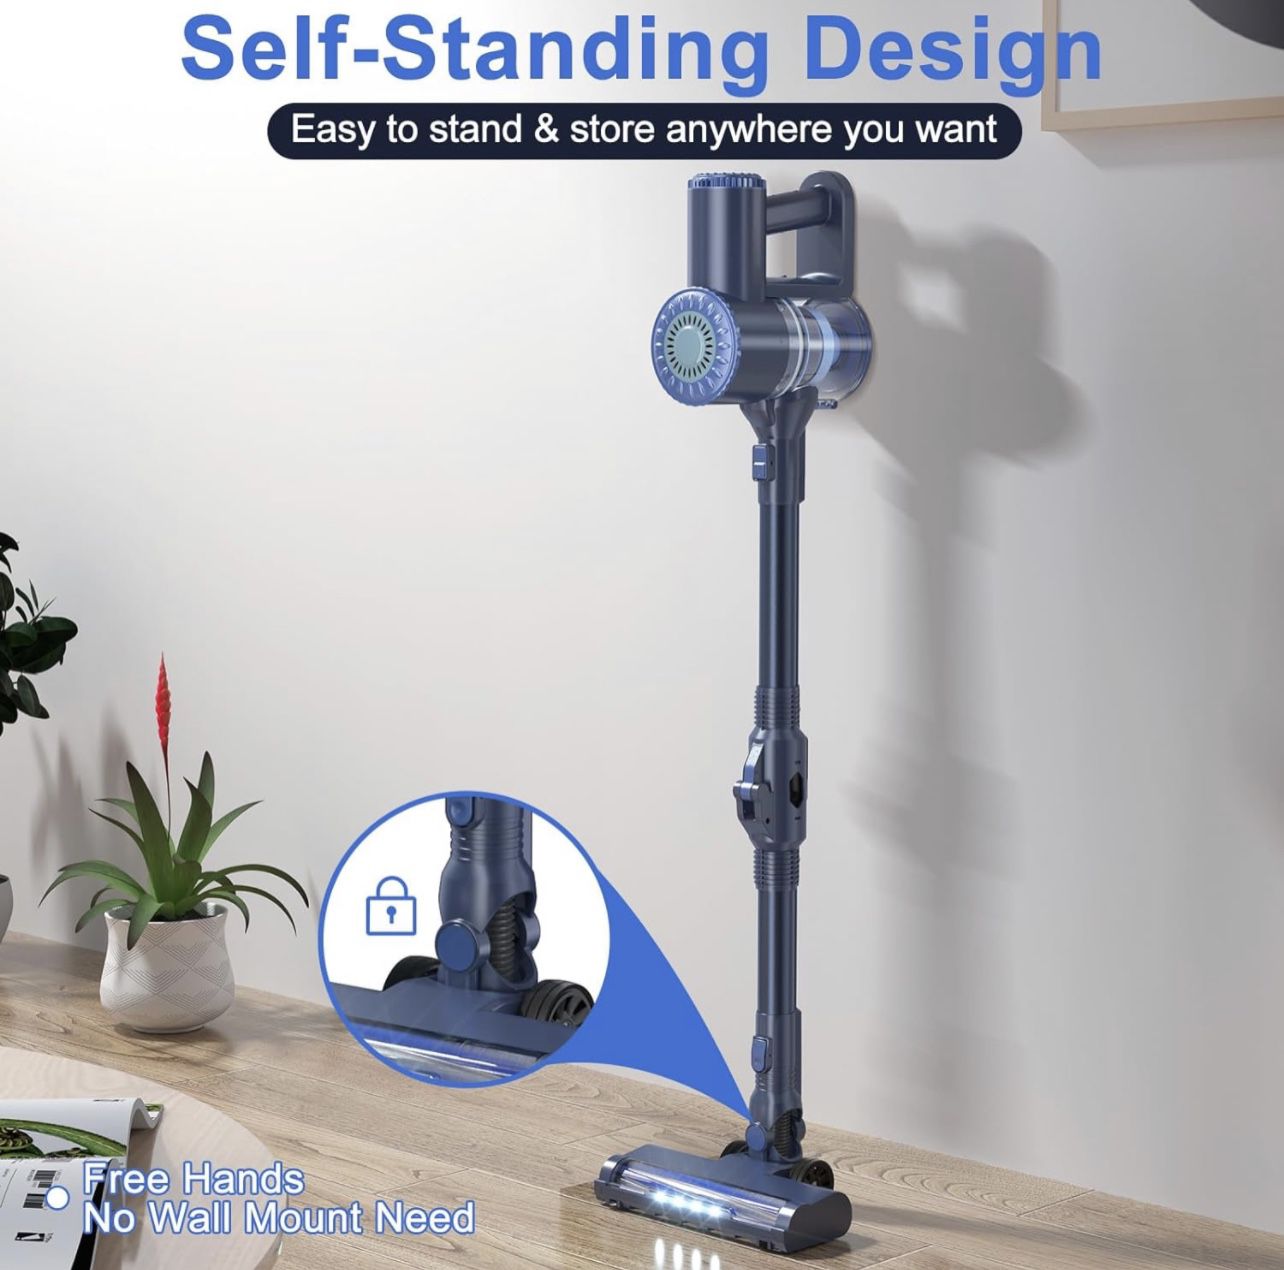 6 in 1 Lightweight Stick Vacuum Self-Standing with Powerful Suction